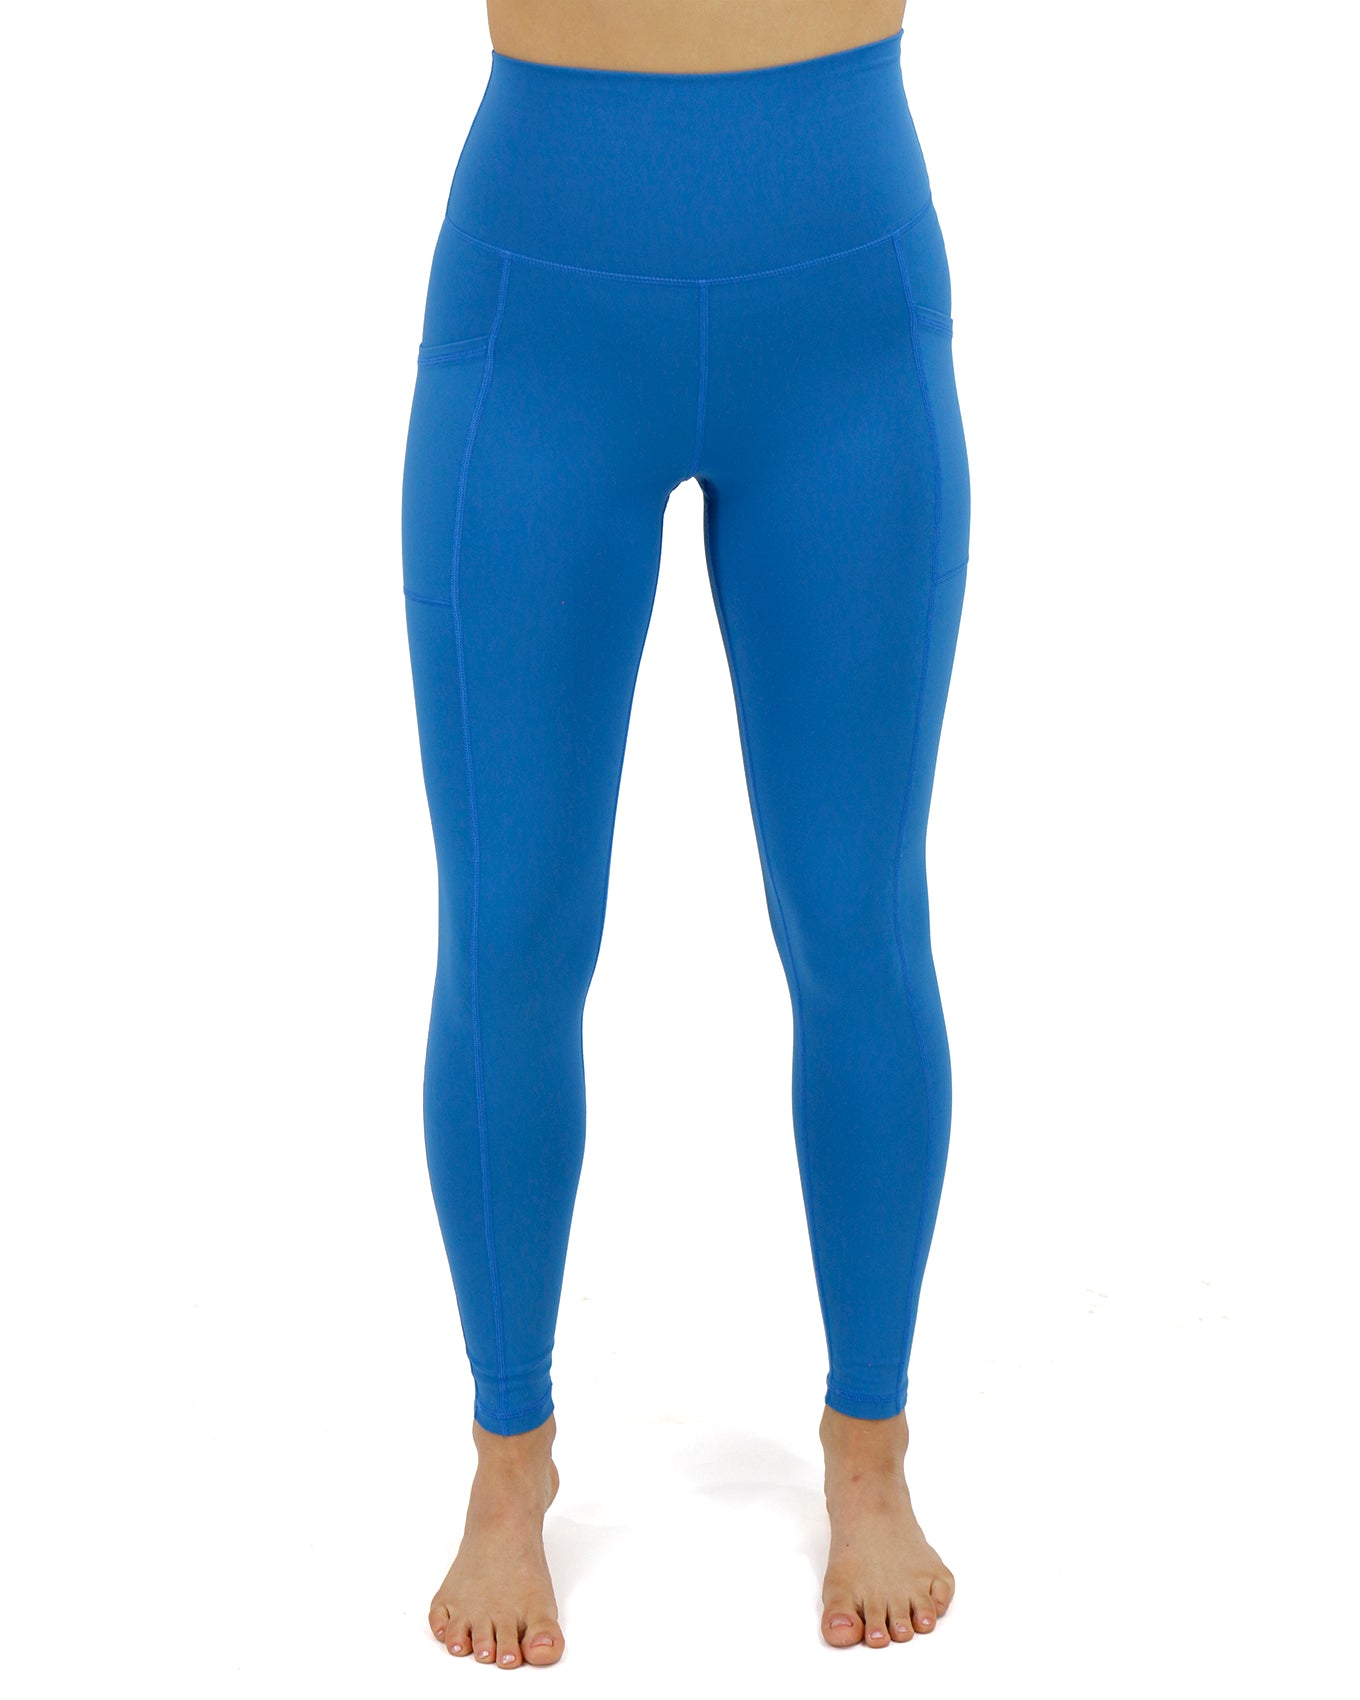 Compressive Leggings with Pockets That Don't Roll Down  Everyday leggings,  Affordable leggings, Squat proof leggings